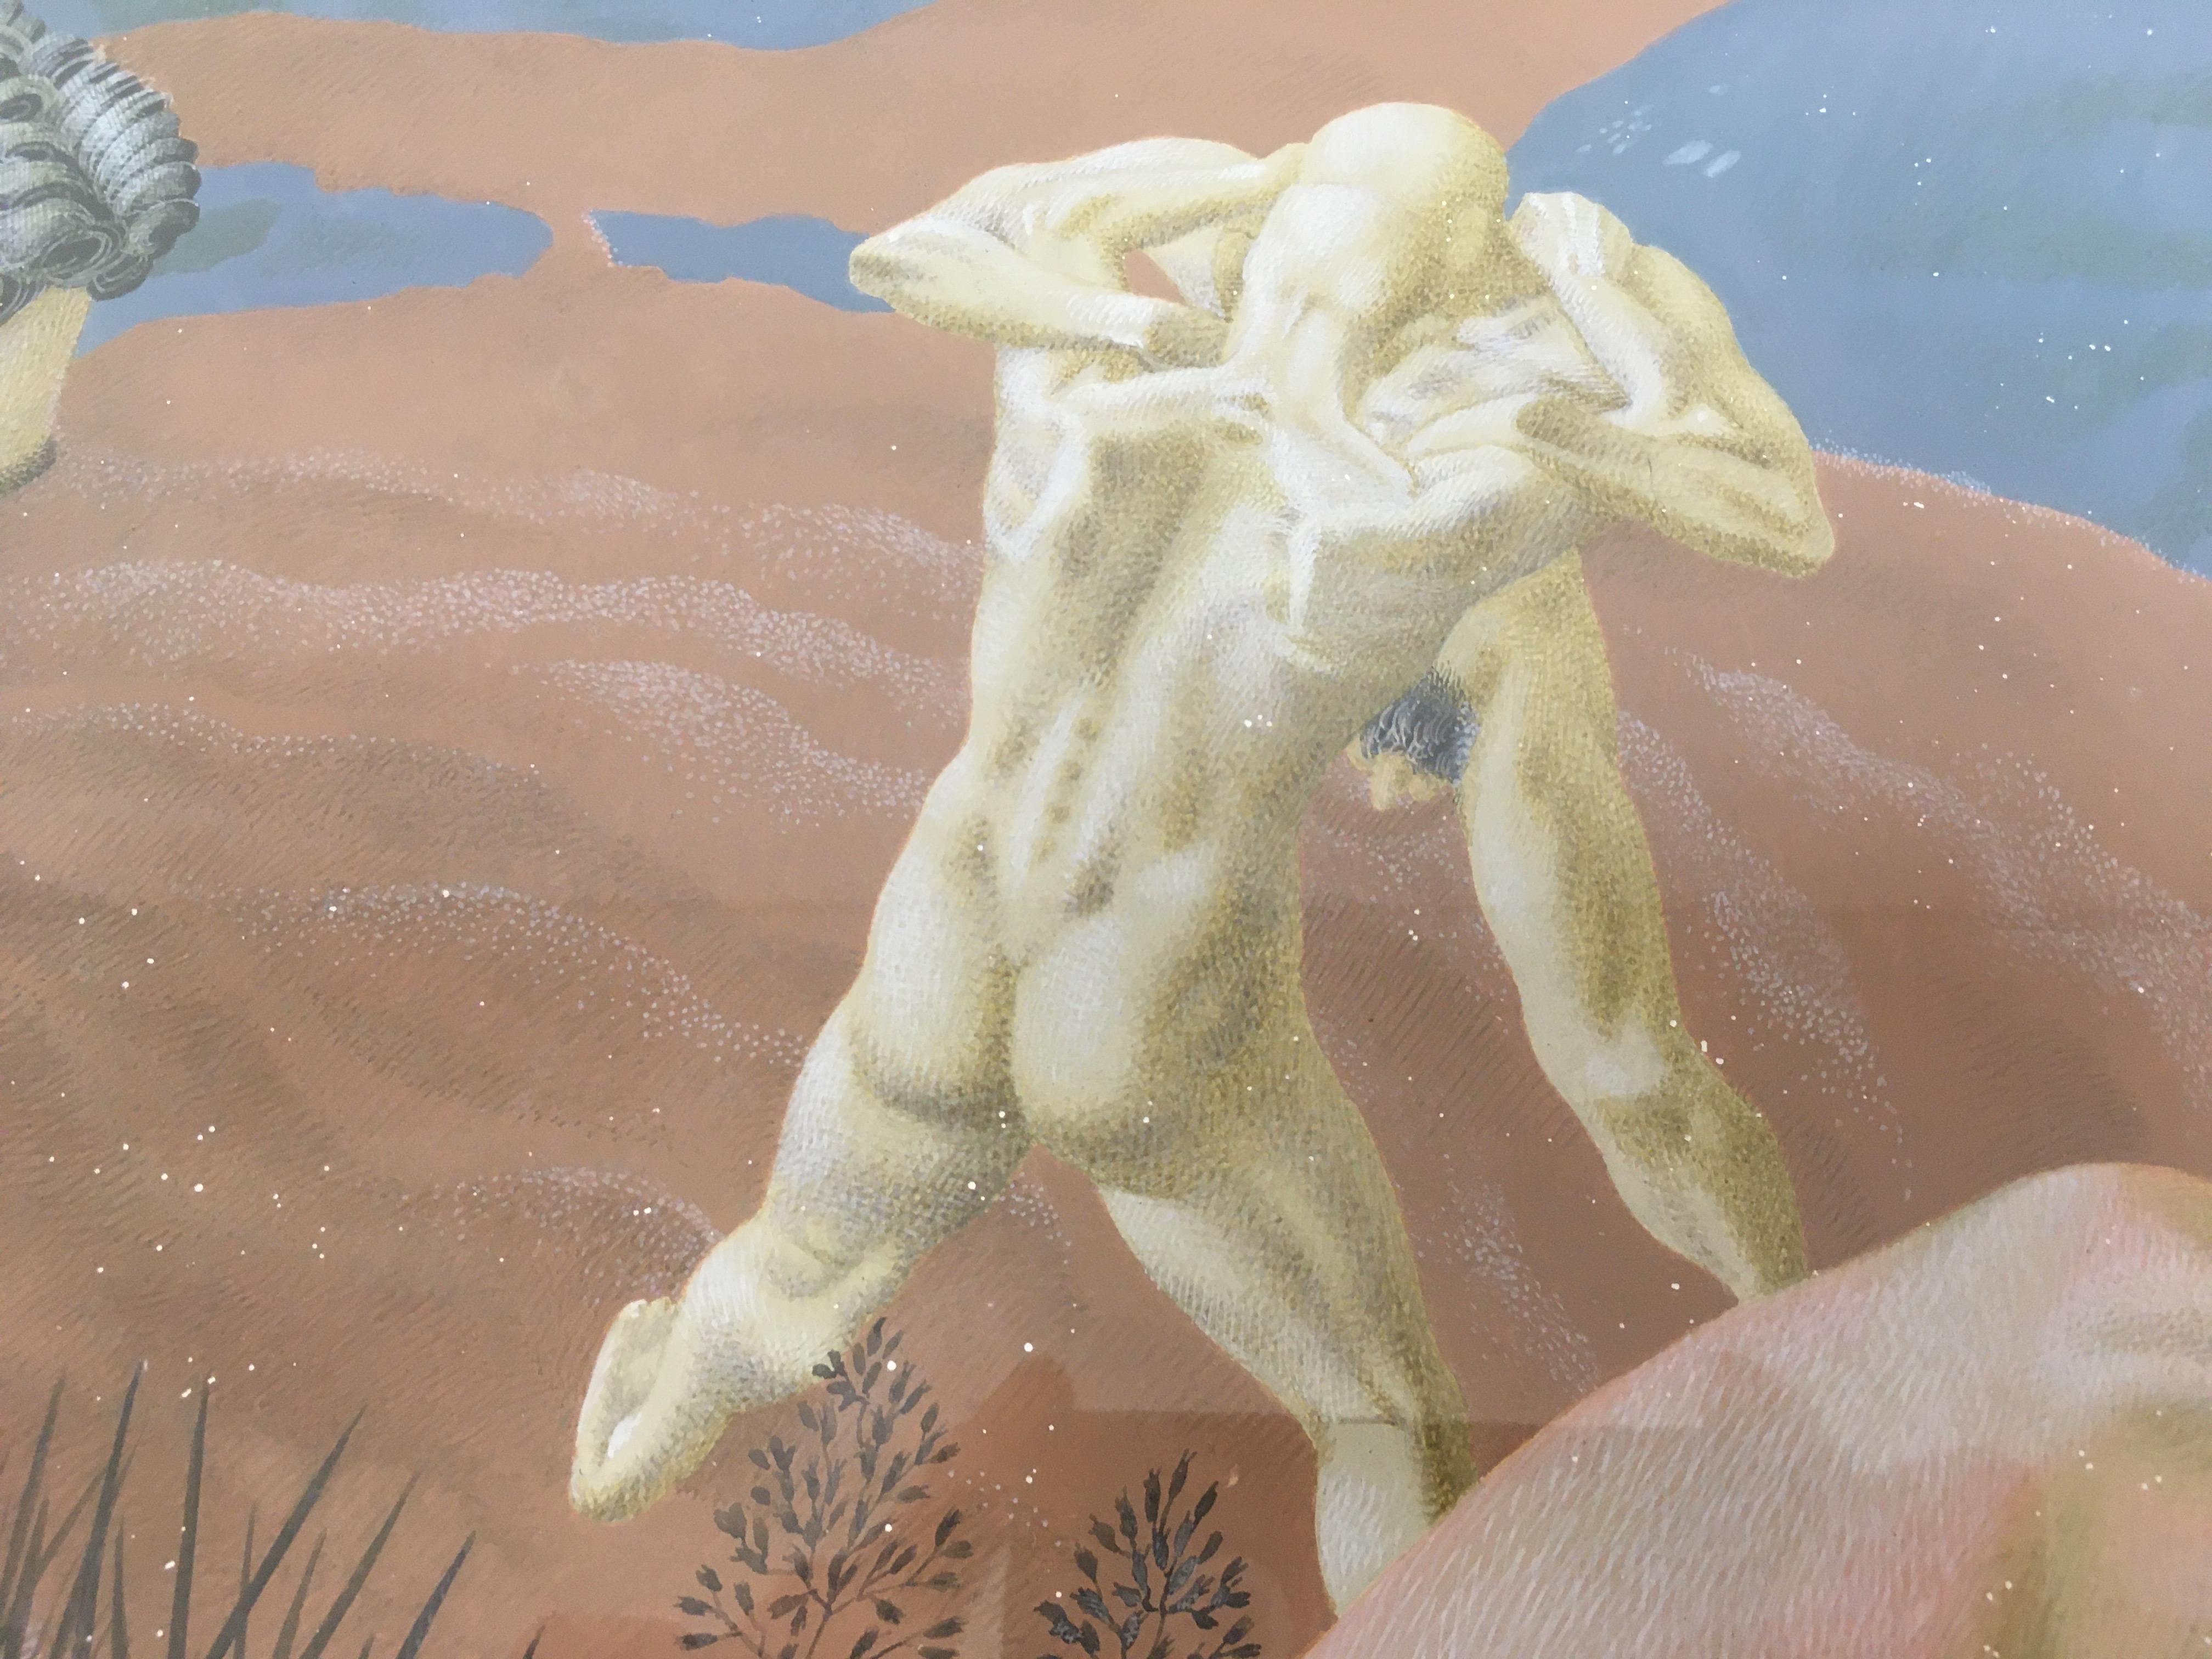 Mid-Century Modern Midcentury Egg Tempera Painting by Francis Plummer Male Nudes